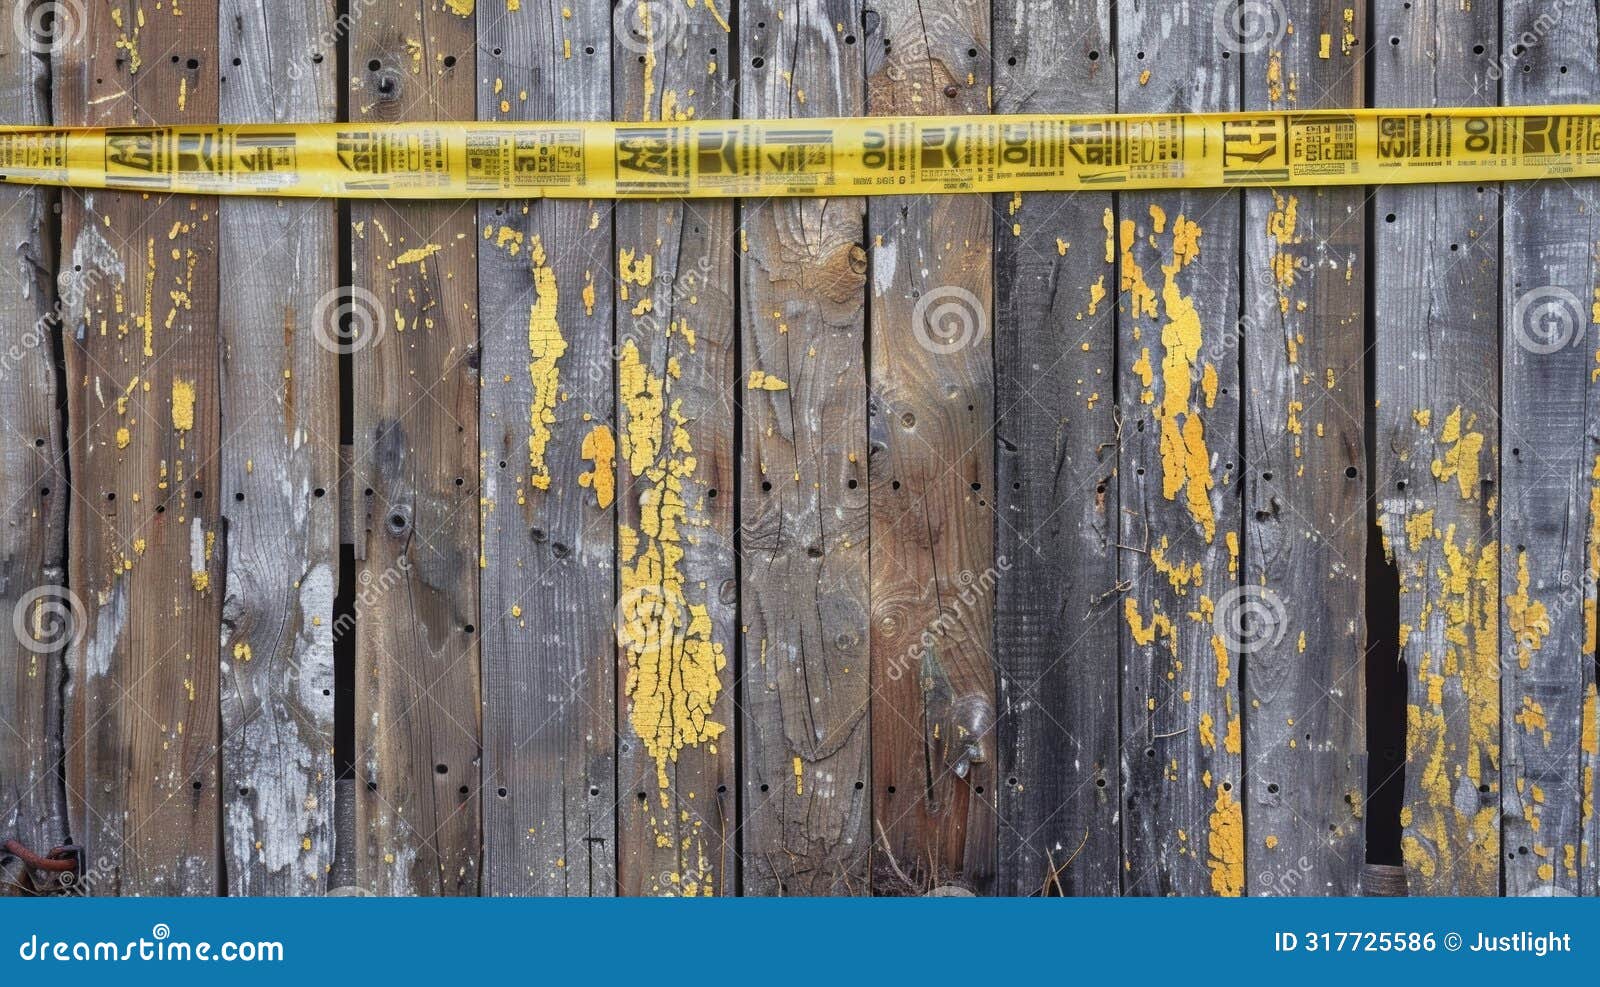 a weathered wooden fence adorned with caution tape and handwritten updates on the ongoing construction